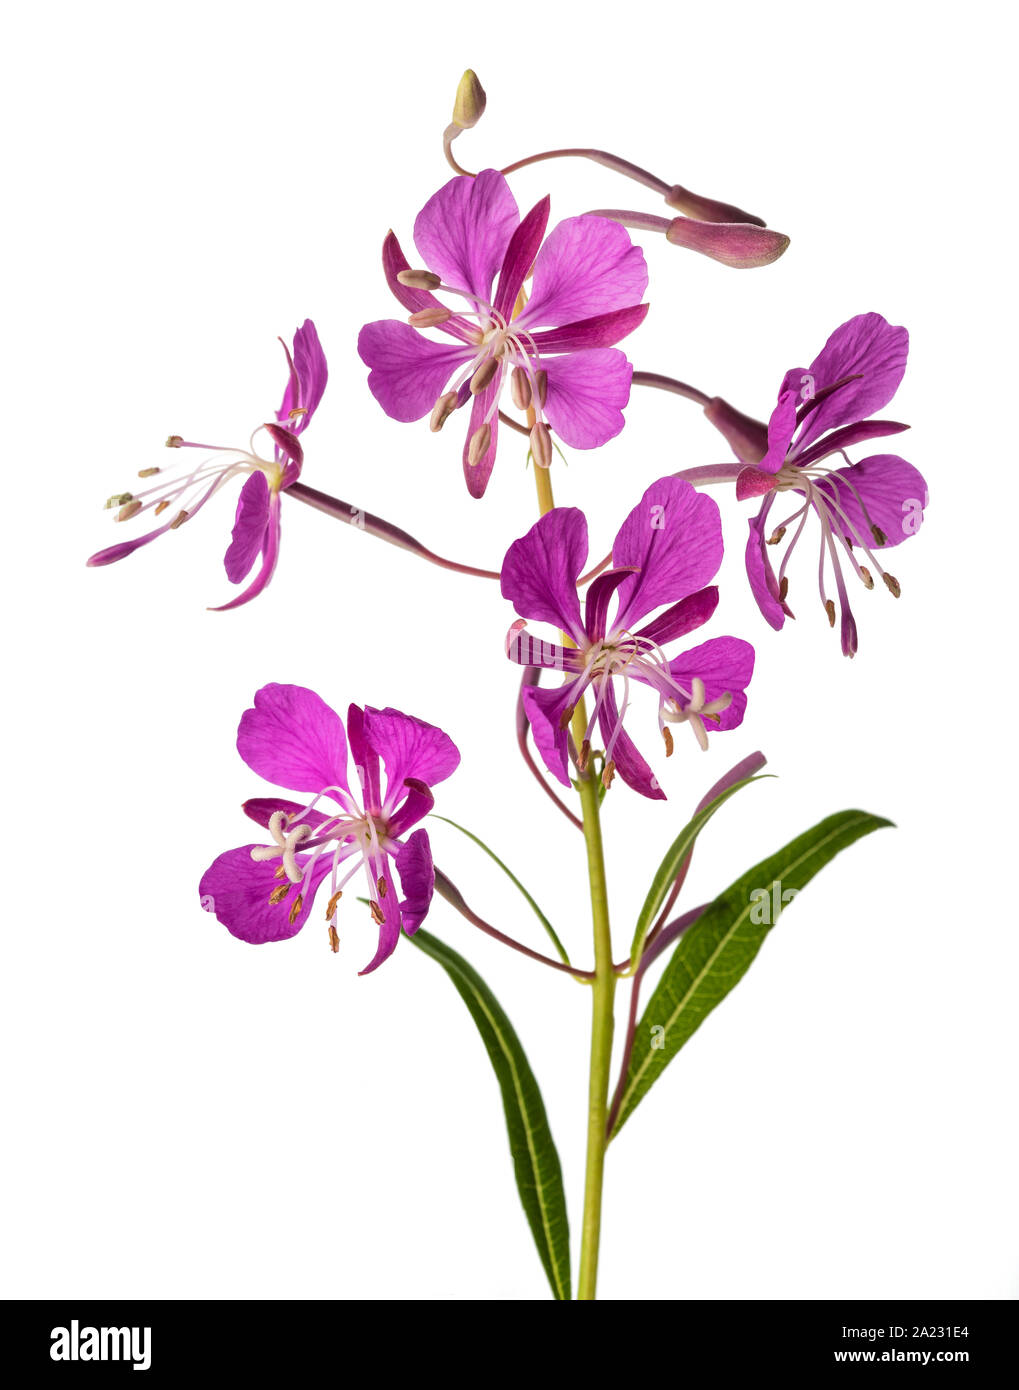 Willow Herb flowers isolated on white background Stock Photo